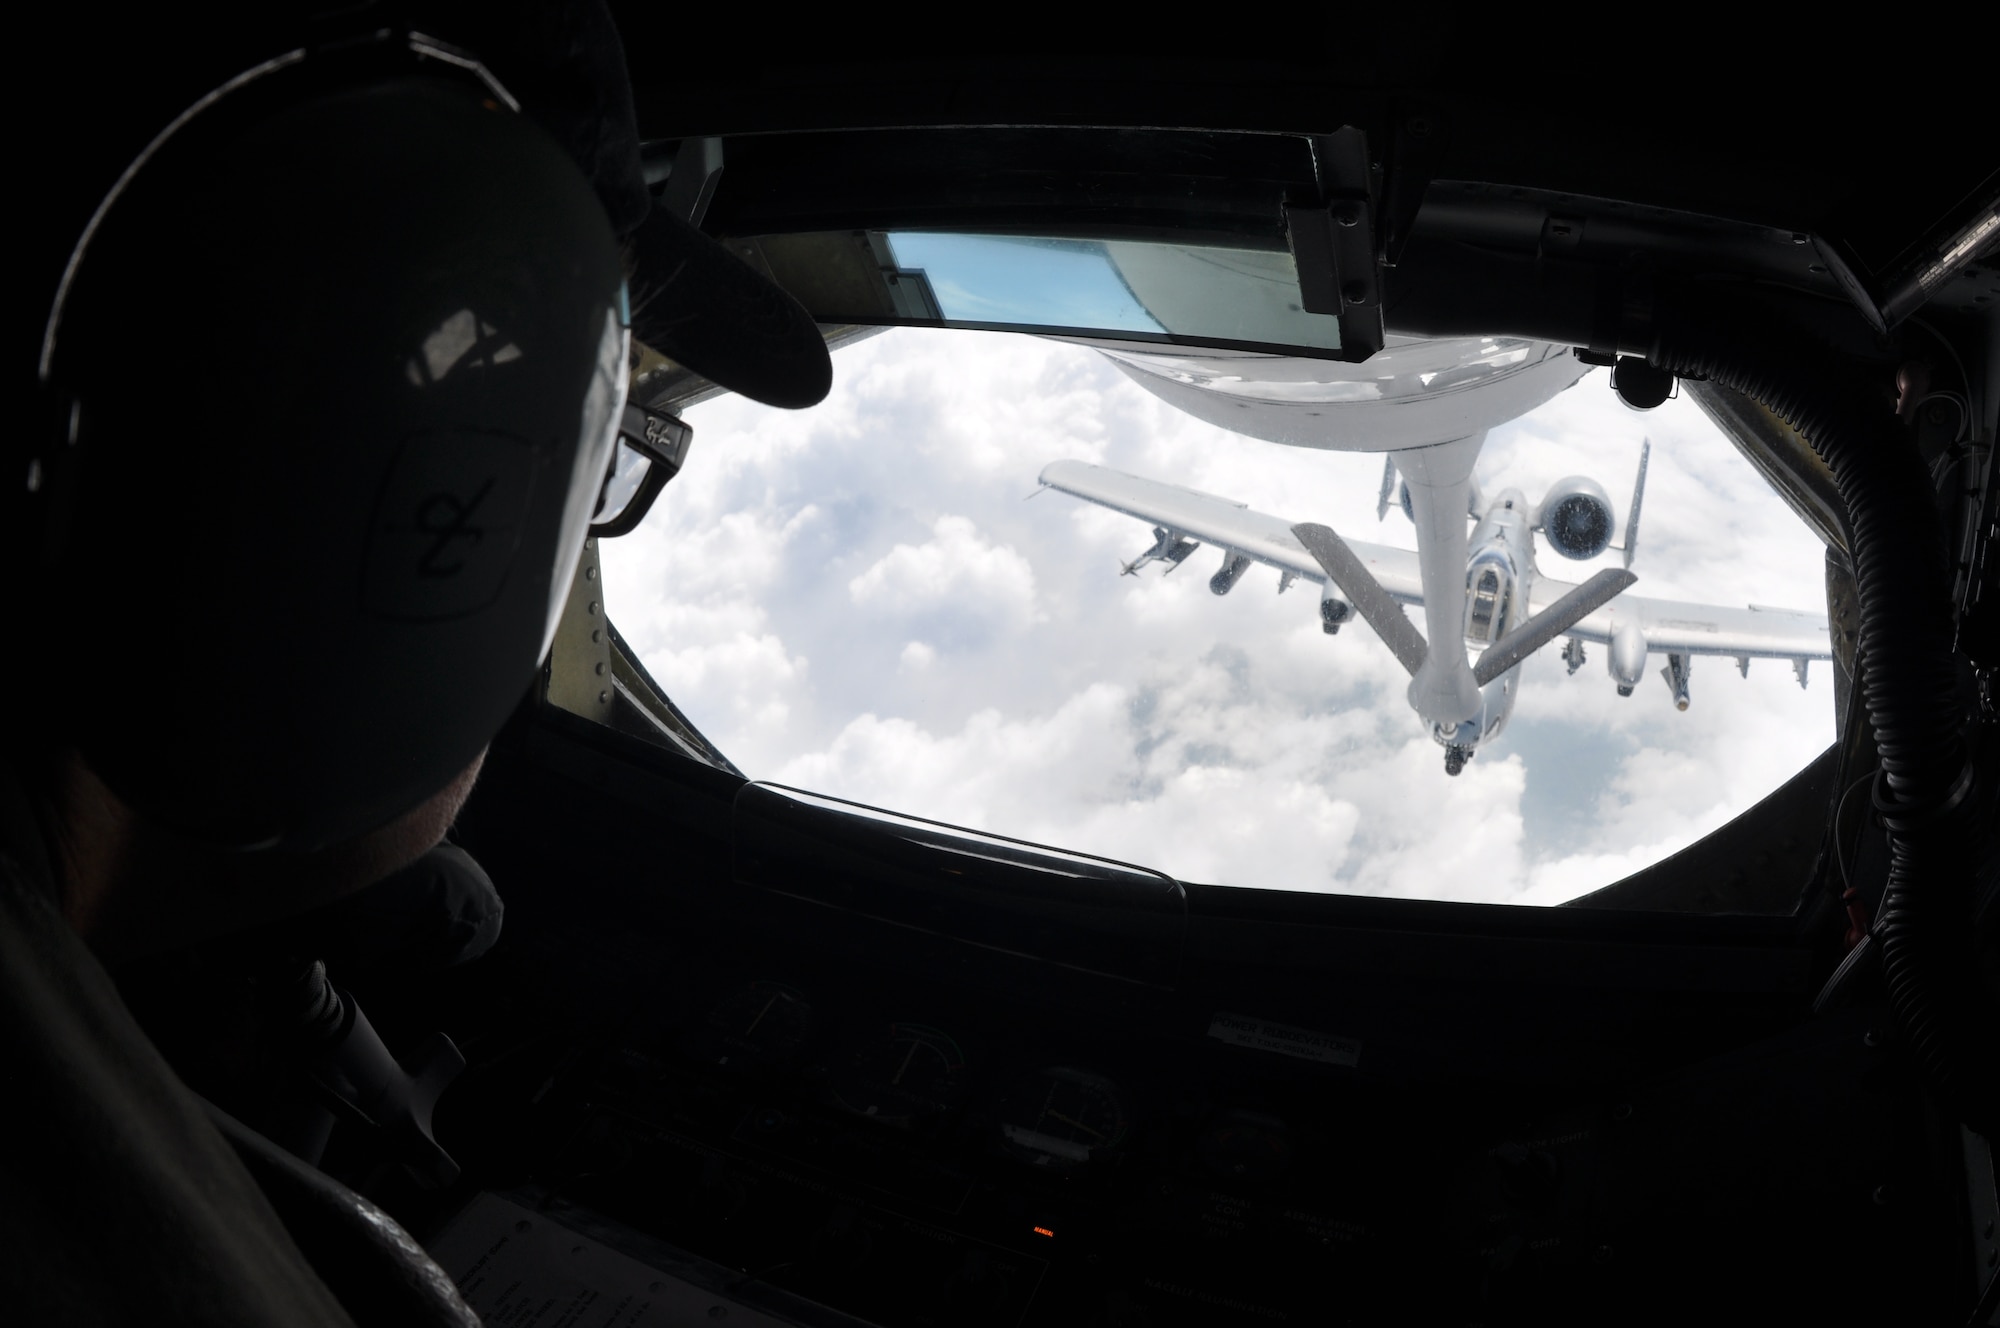 Chief Master Sgt. Kathy Lowman, 18th Air Refueling Wing Squadron boom operator, refuels an -10 Thunderbolts from the 442nd Fighter Wing at Whiteman AFB, Mo., during a during a "Bosslift" sponsored by the local Employer Support of the Guard and Reserve, Aug. 3, 2019.  During the flight, ten civilian employers of 931st Air Refueling Wing Traditional Reservists observed the aerial refueling of the A-10s by a 931st Air Refueling Wing aircrew.